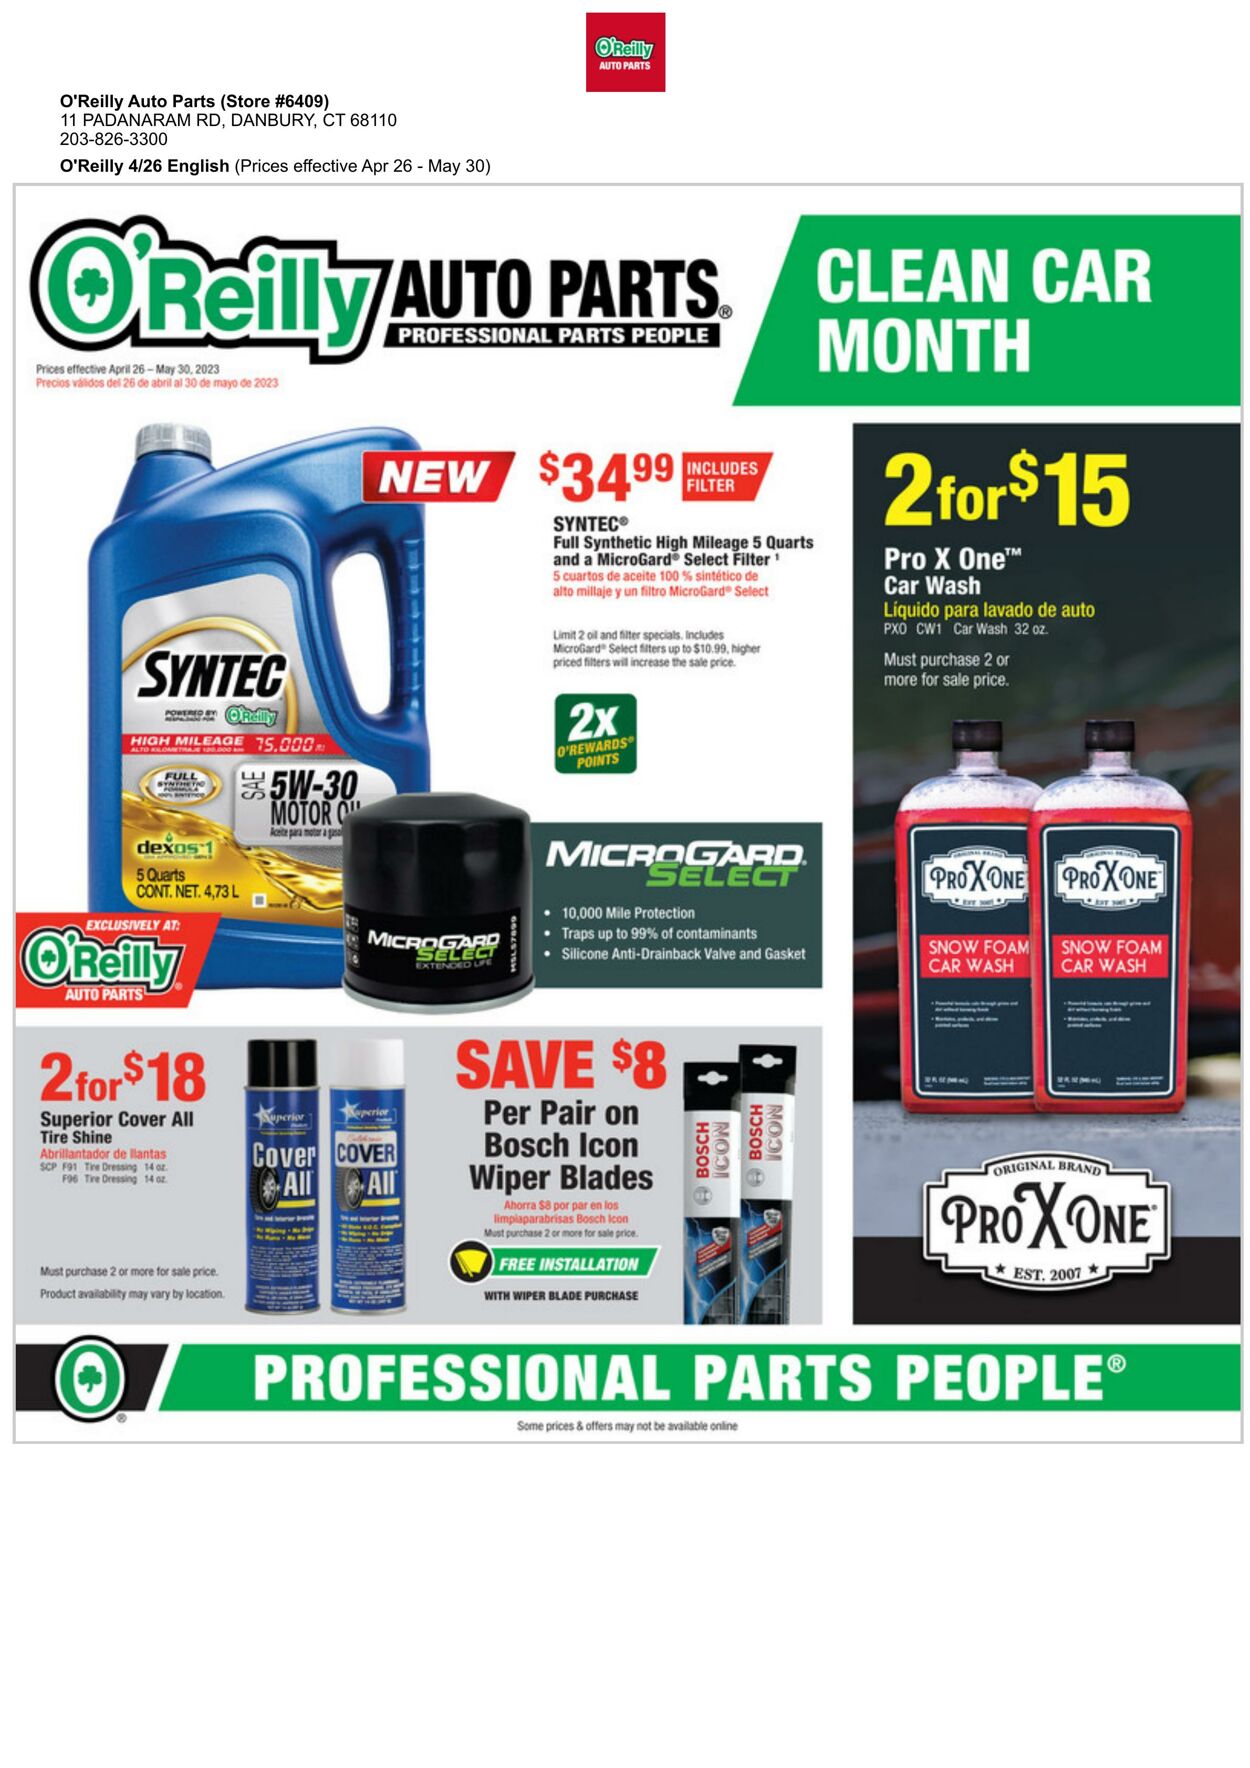 O’Reilly Auto Parts Promotional weekly ads